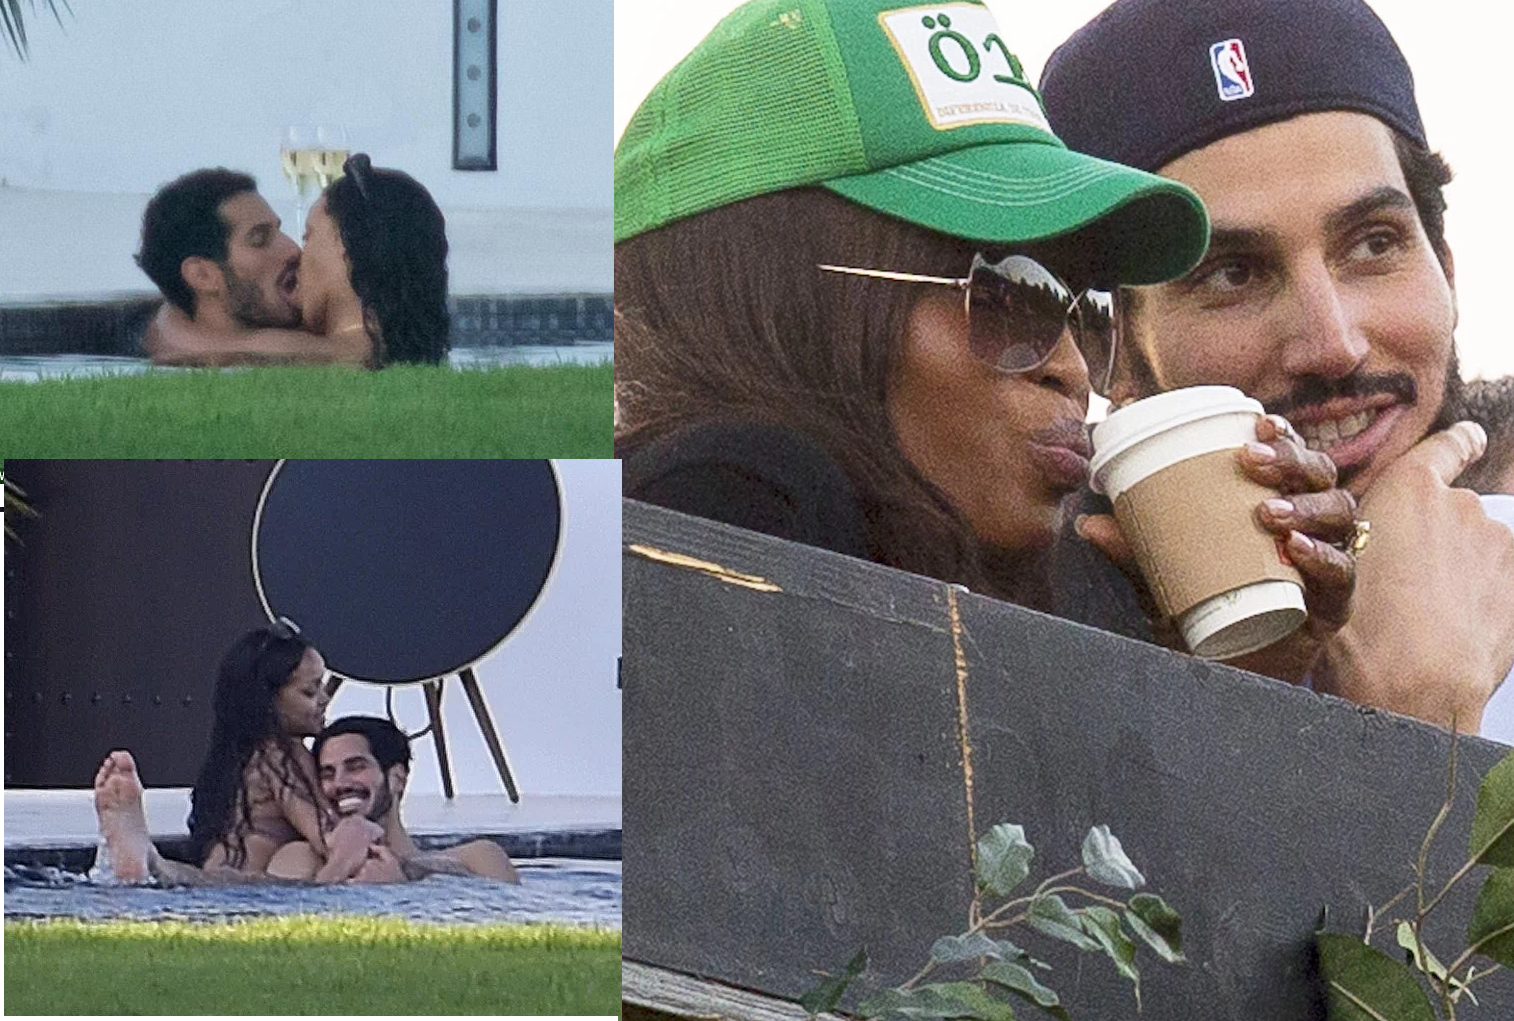 Latest Updates: Rihanna's billionaire Arab lover caused feud with Naomi Campbell1514 x 1021